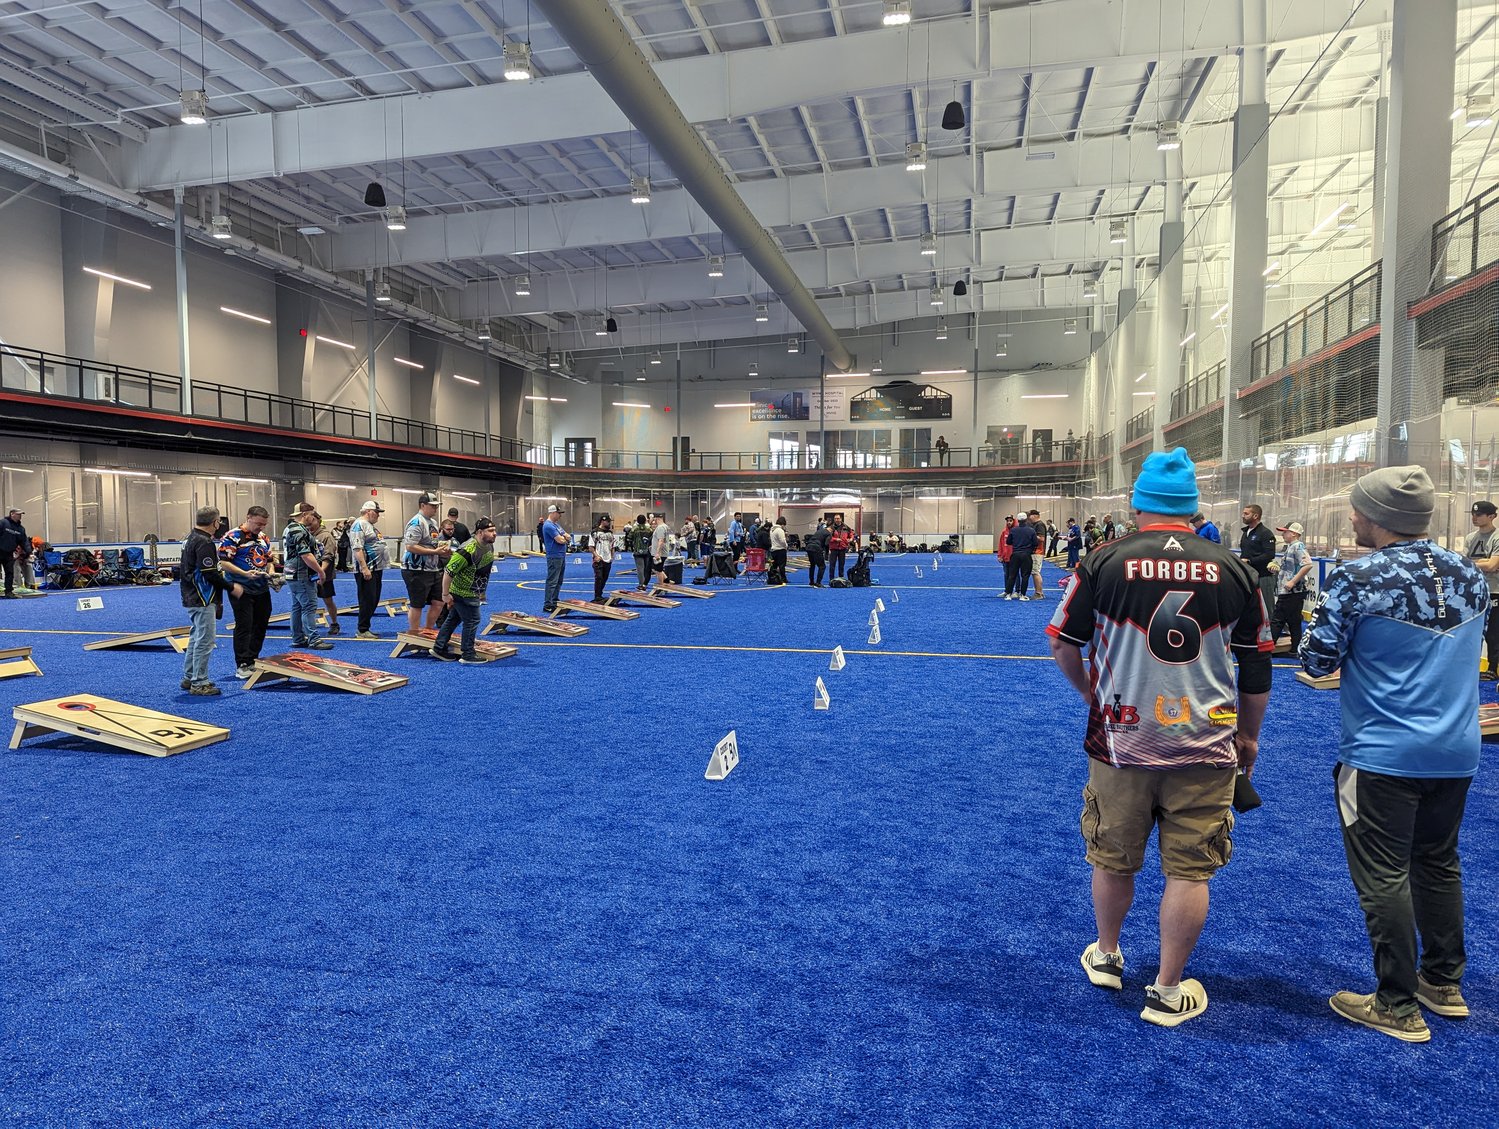 Custom-printed jerseys and shirts were all the rage at the professional cornhole tournament at the Utica University Nexus Center on Saturday. Amateurs and professionals are known to travel even states away to participate in monthly regional tournaments.